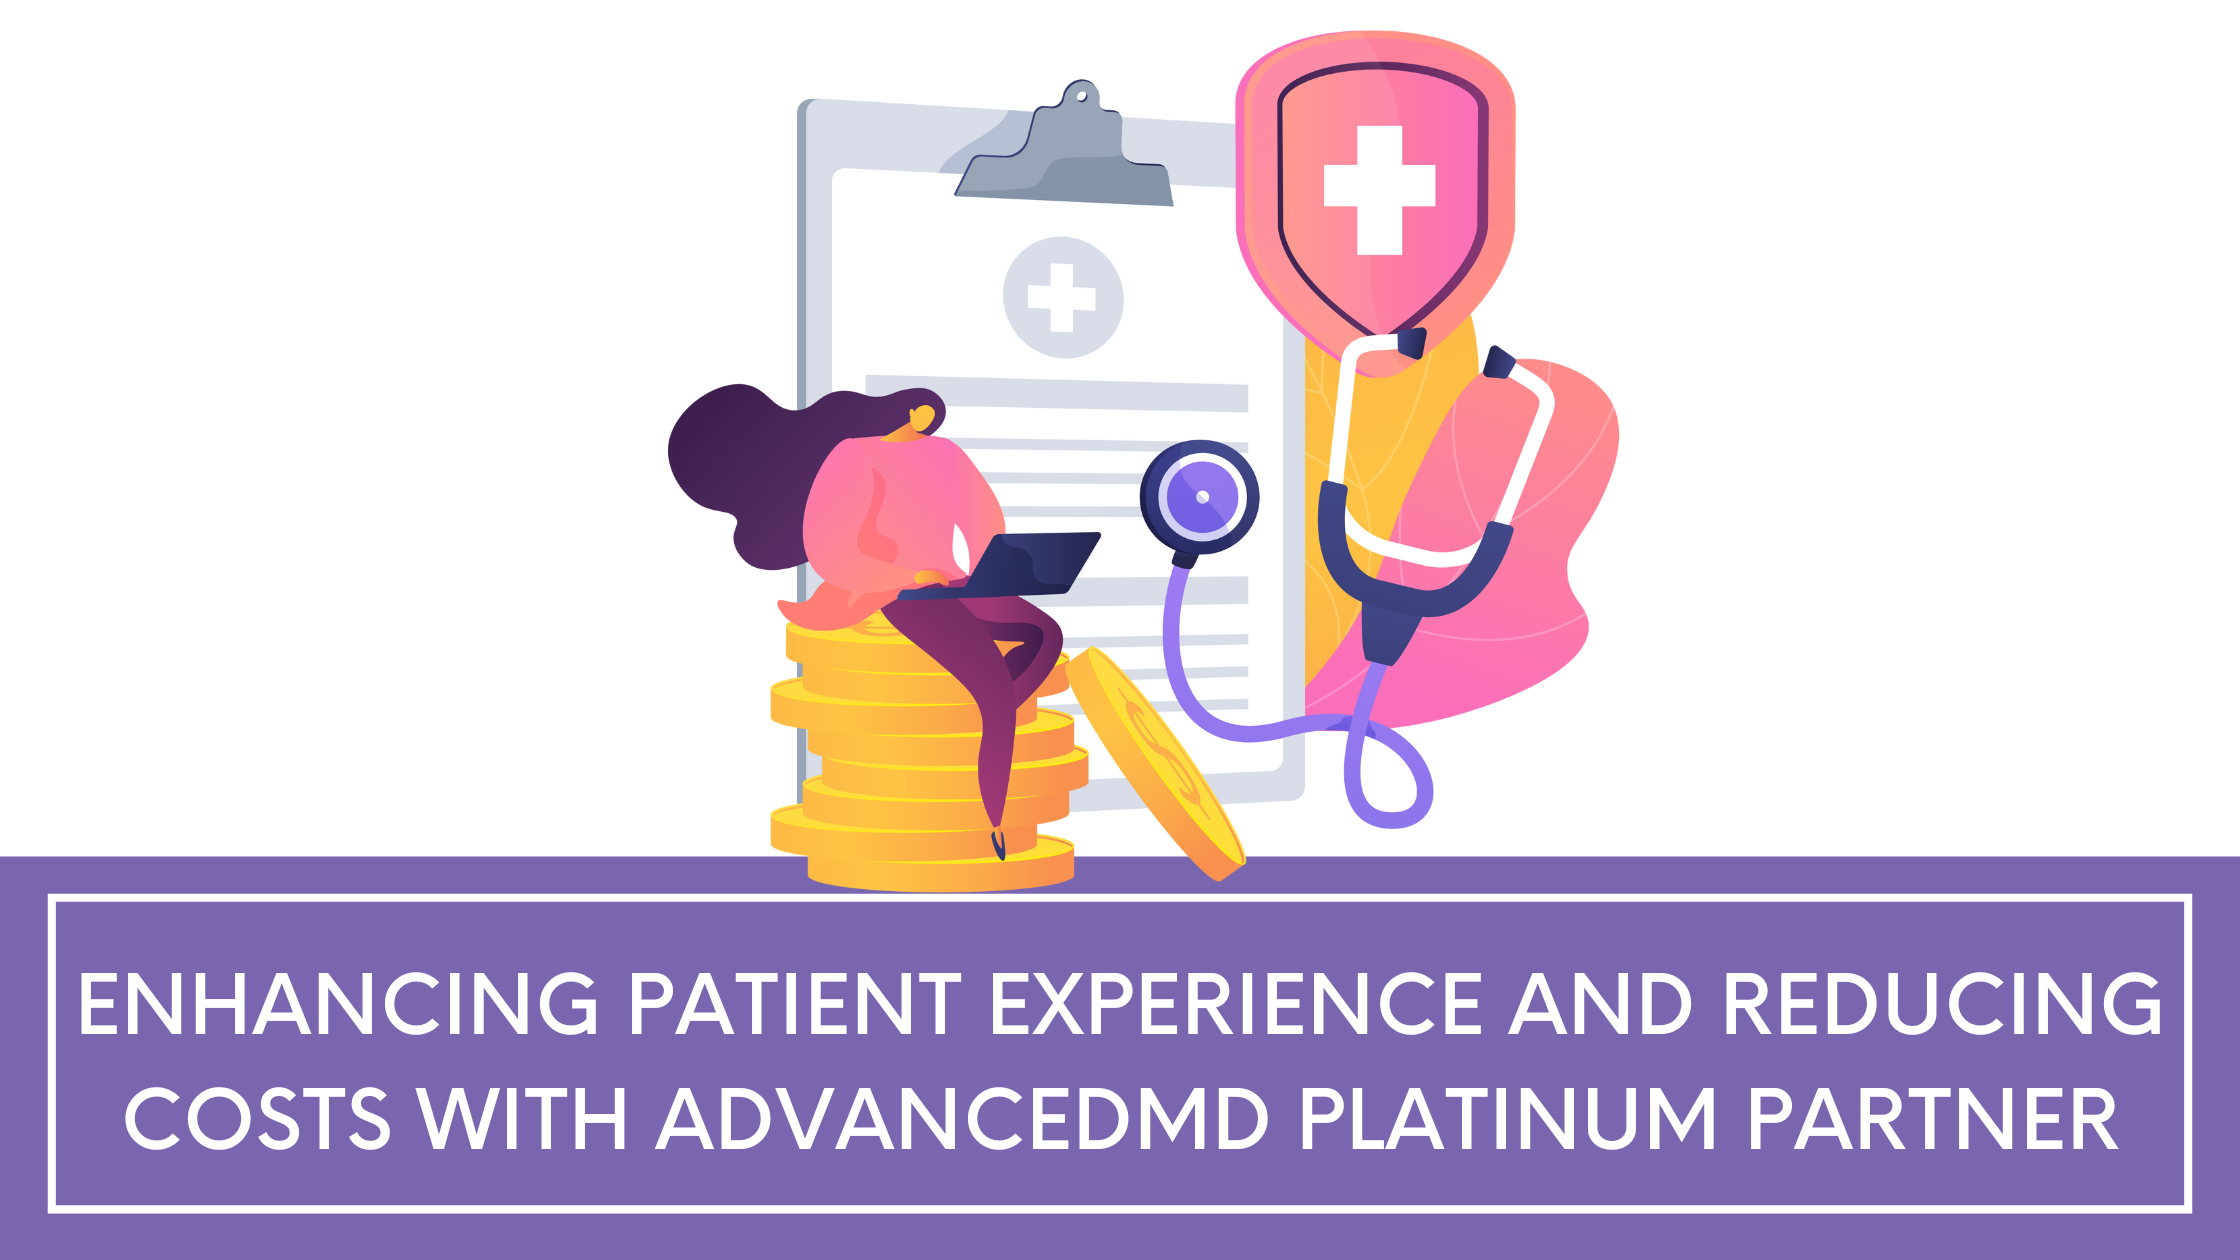 Enhancing Patient Experience and Reducing Costs with AdvancedMD Platinum Partner